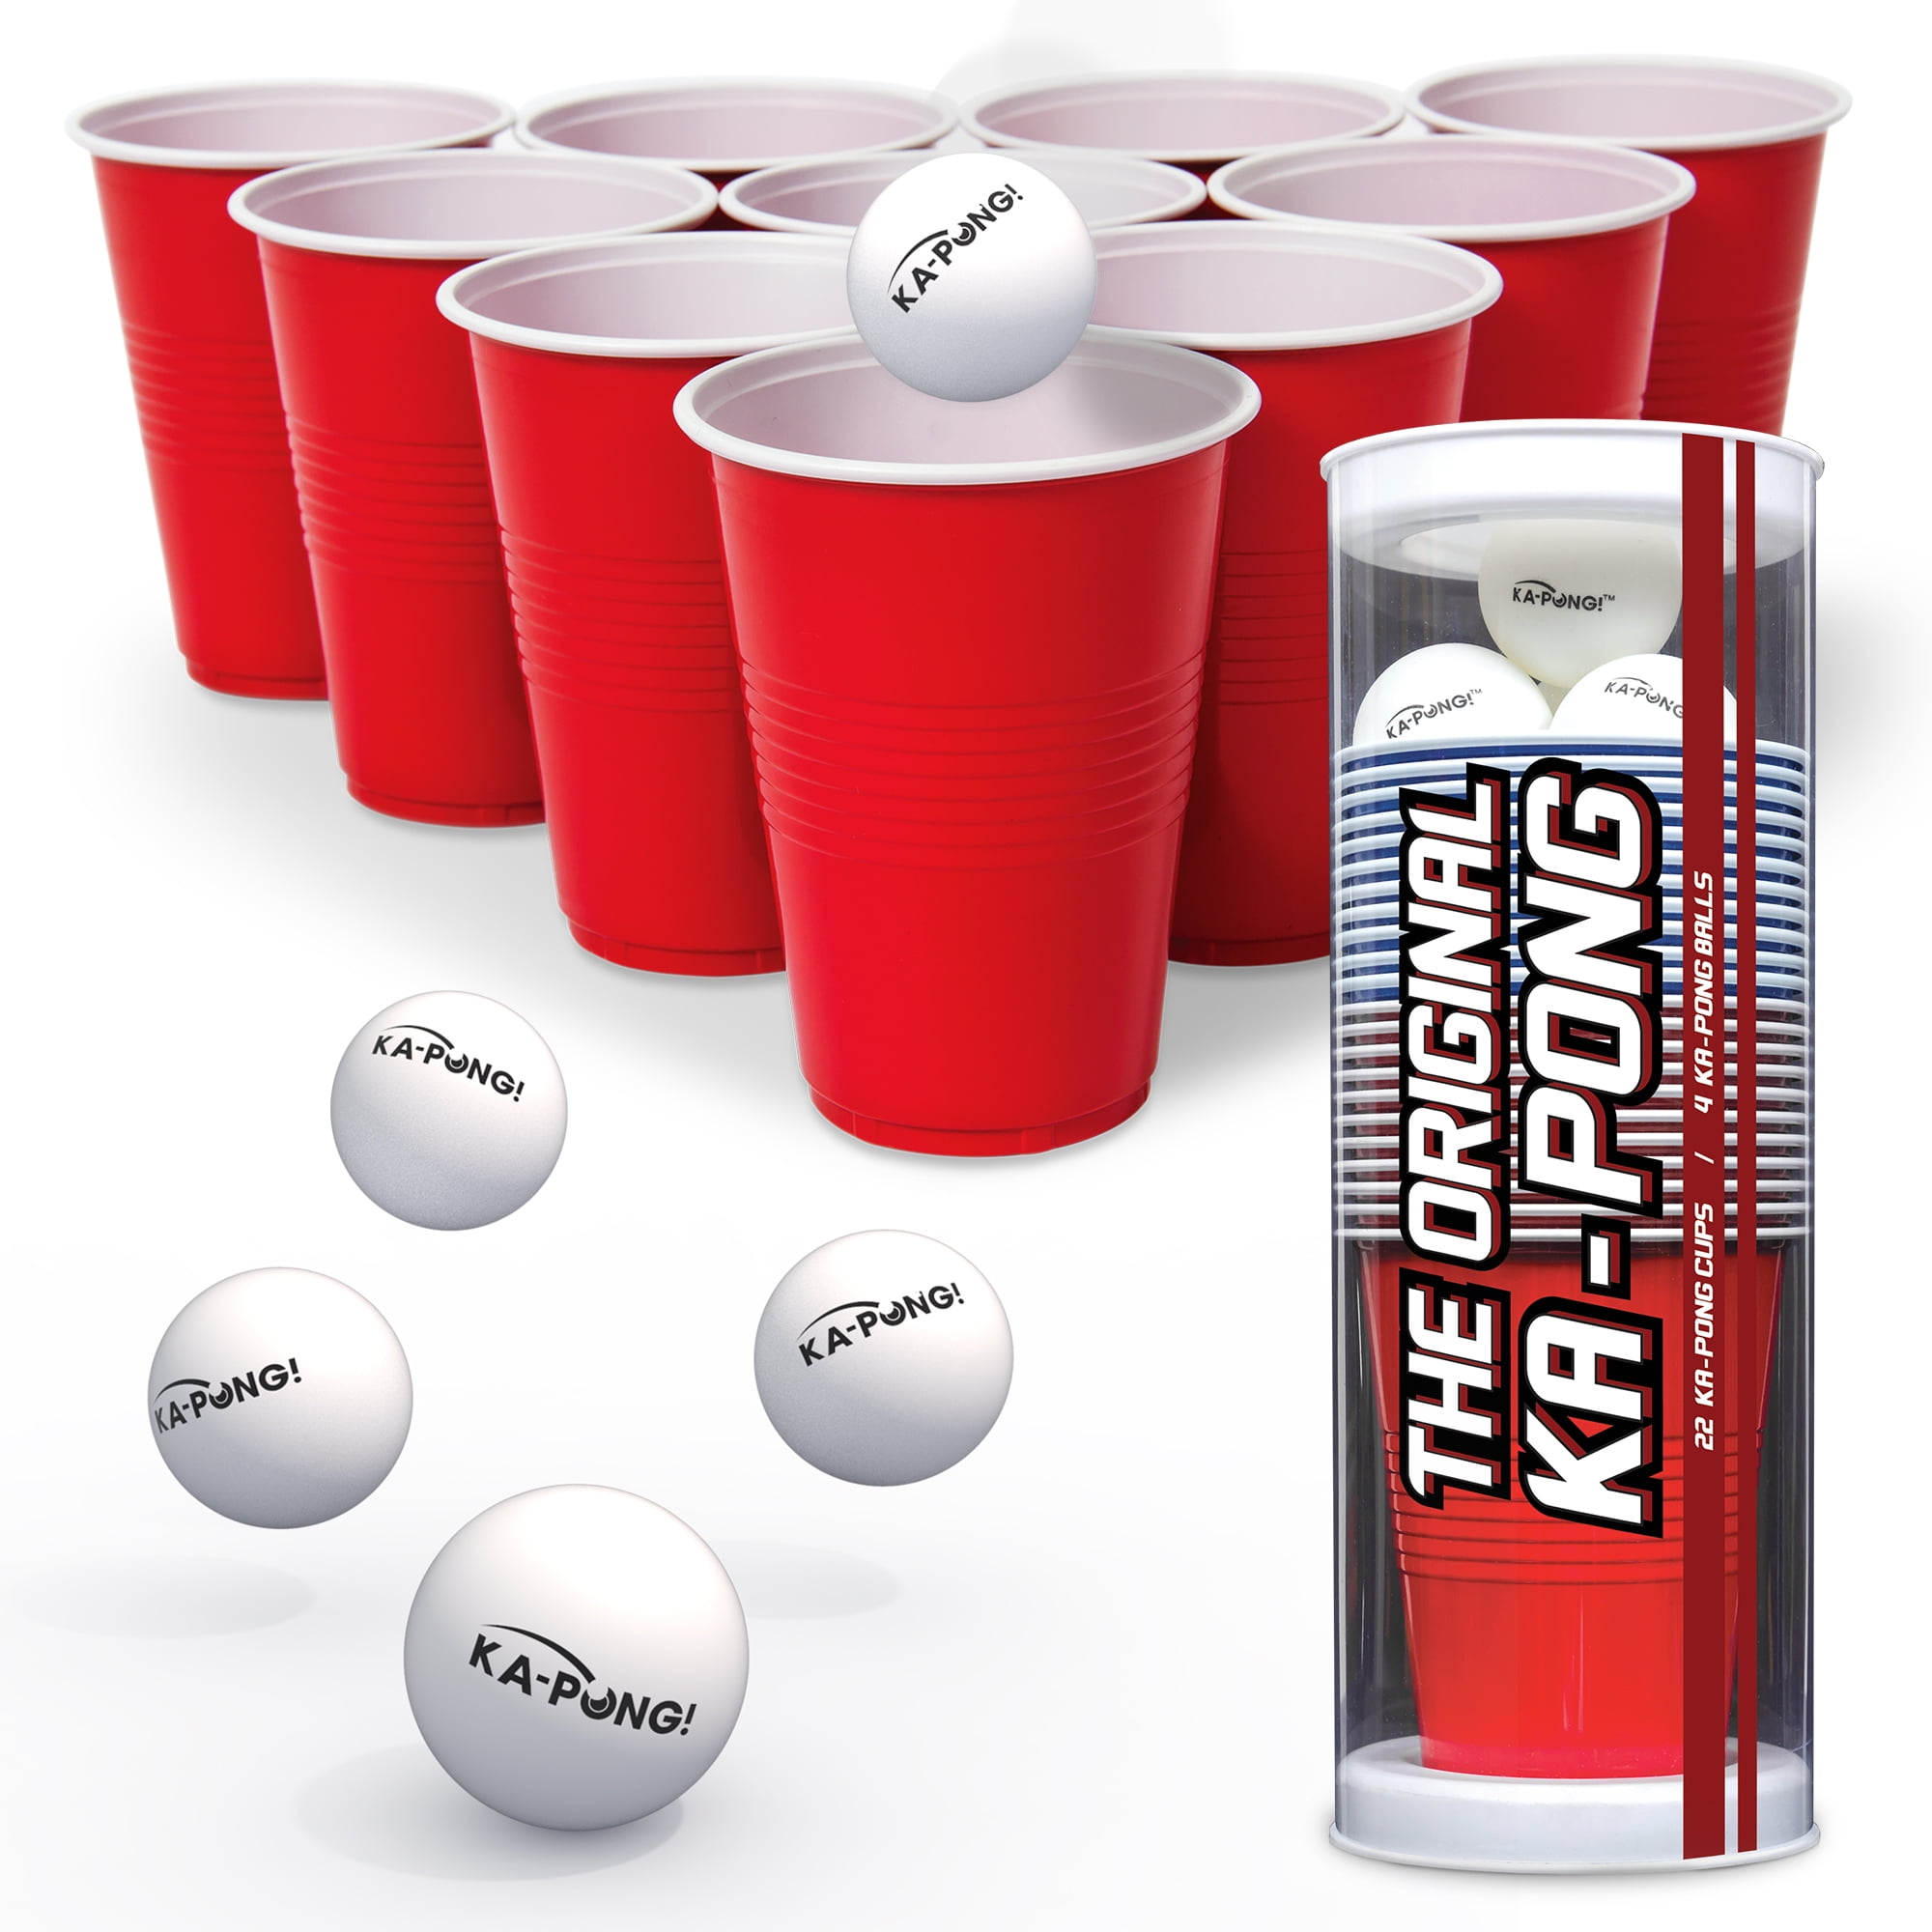 GoBig Giant 110 oz Red Party Cup 24 Pack with 4 XL Pong Balls - 24 Giant  Cups for Beer Pong, Flip Cup or Novelty Use